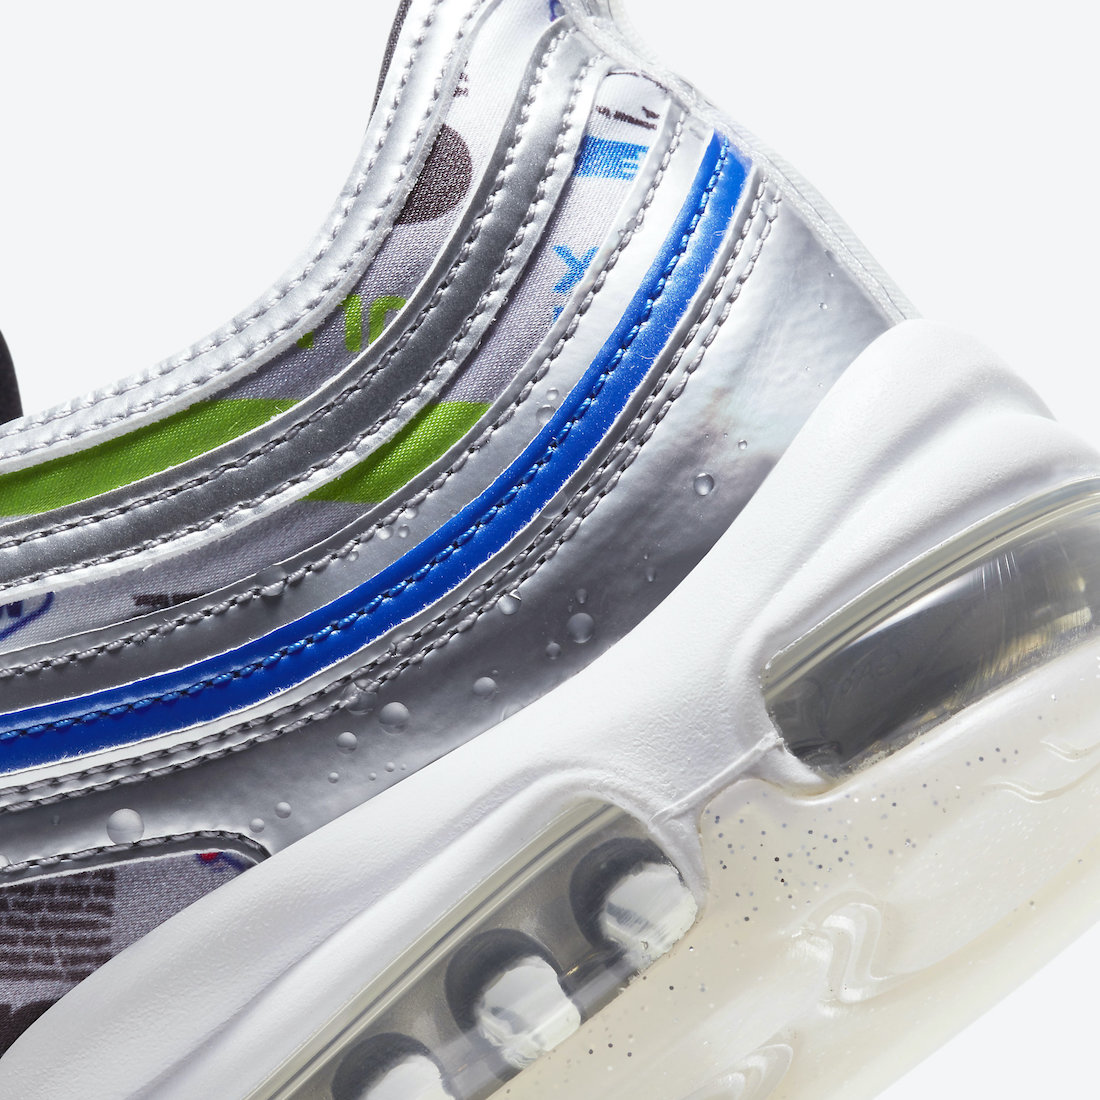 Nike Air Max 97 SE Energy Jelly DD5480-902 Release Date